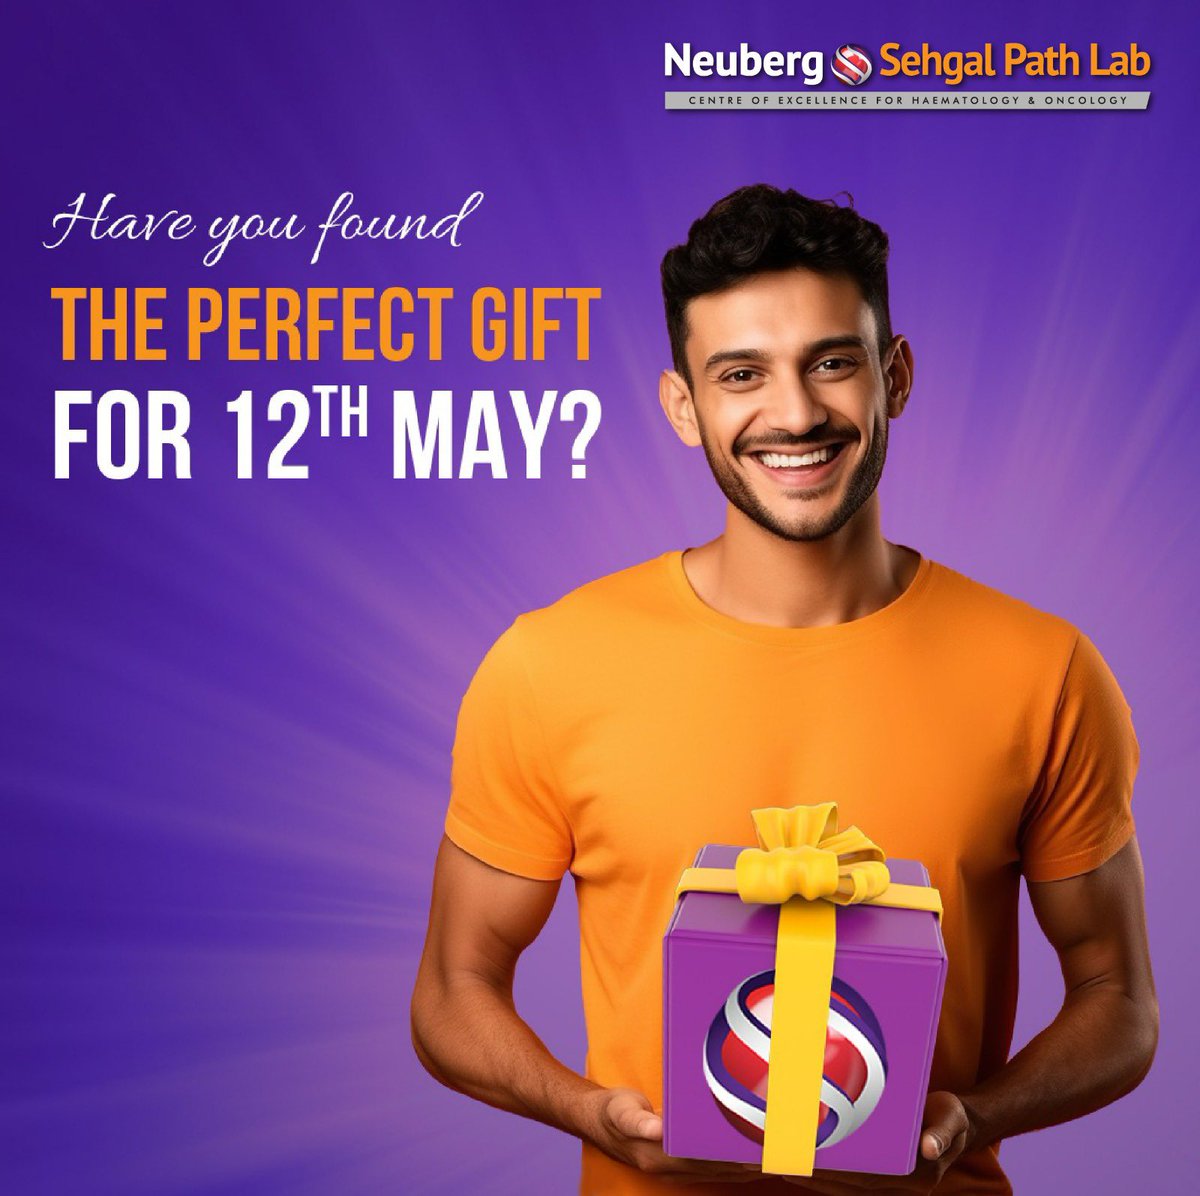 Looking for the perfect gift for 12th May - Mothers Day ? We have got just what you need.
#staytuned #watchthisspace #12May #sehgalpathlab #neubergsehgalpathlab #neubergdiagnostics @drkunalsehgal